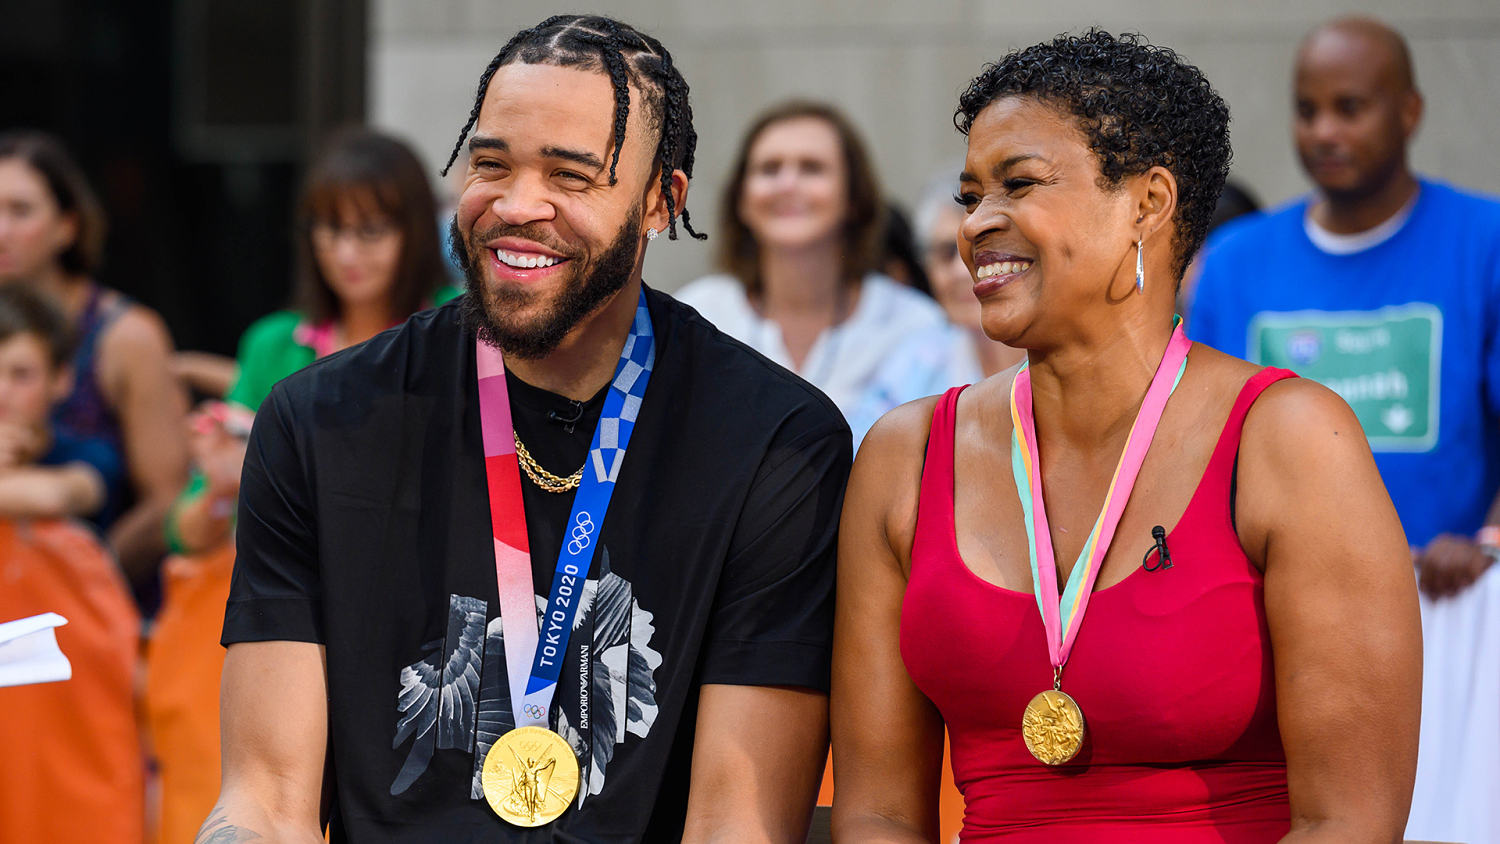 A Reporter At The Olympics Asked JaVale McGee If His Mom's Still Alive